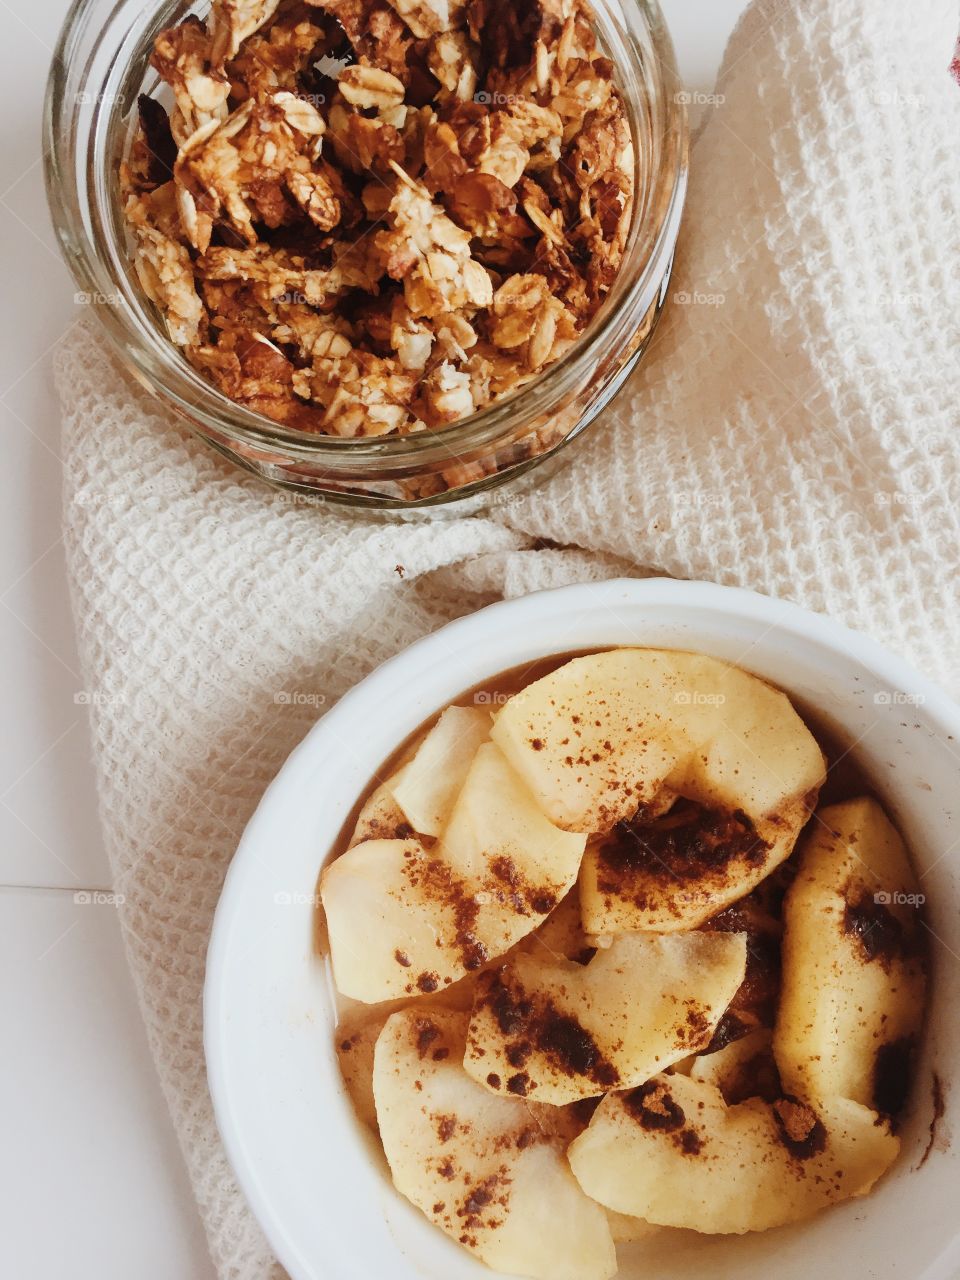 Baked apples and homemade granola 